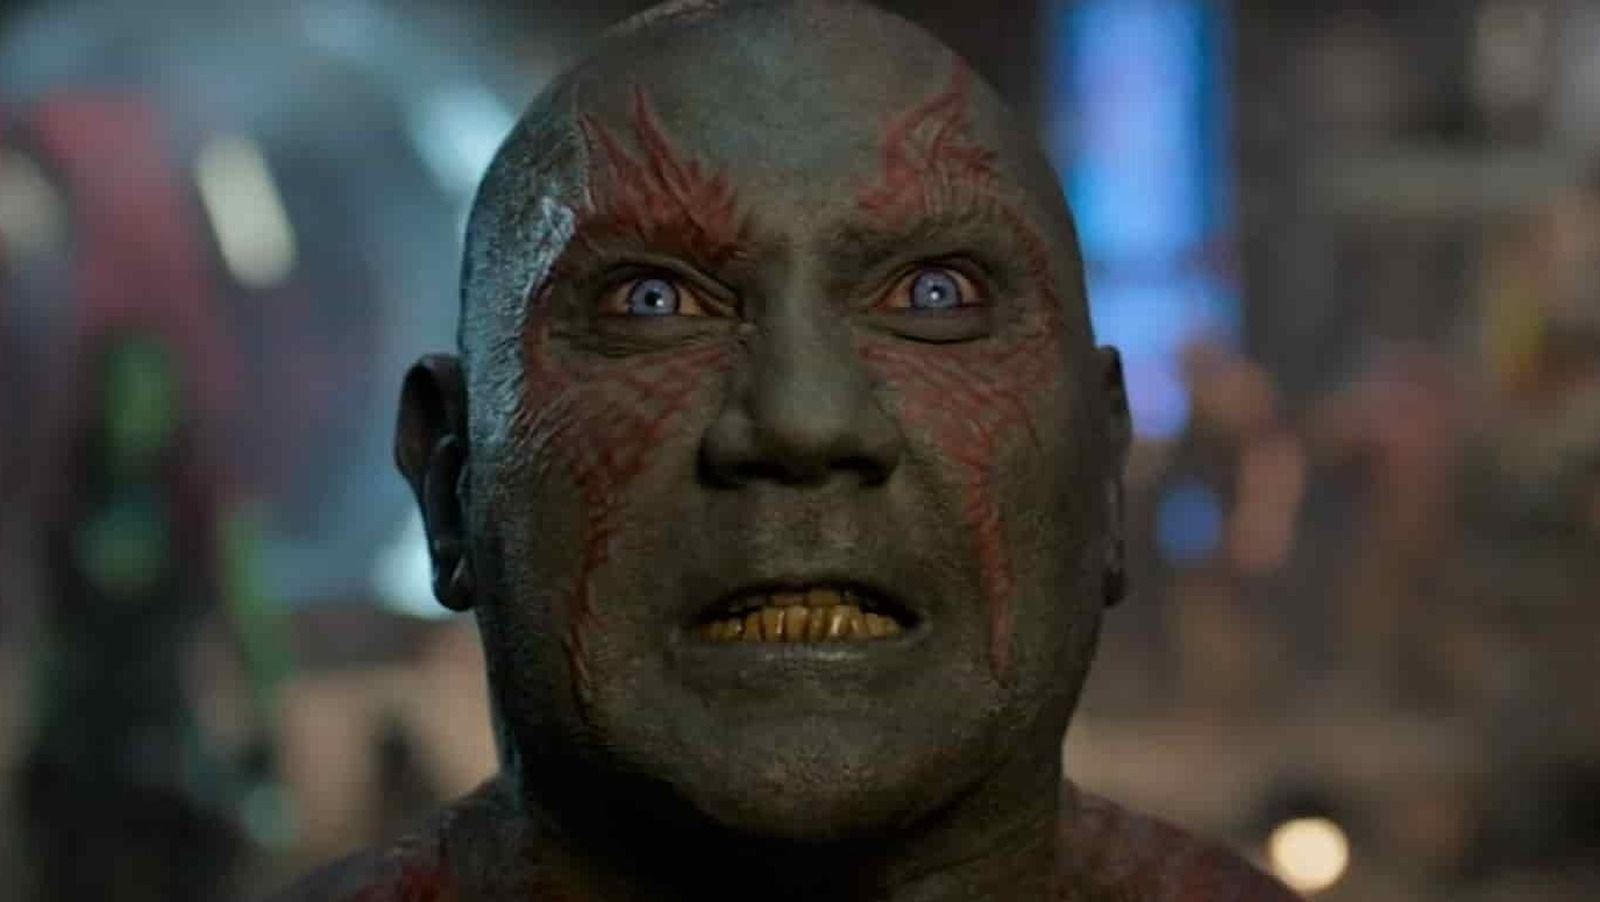 Batista is a WWE Superstar who ventured into the MCU